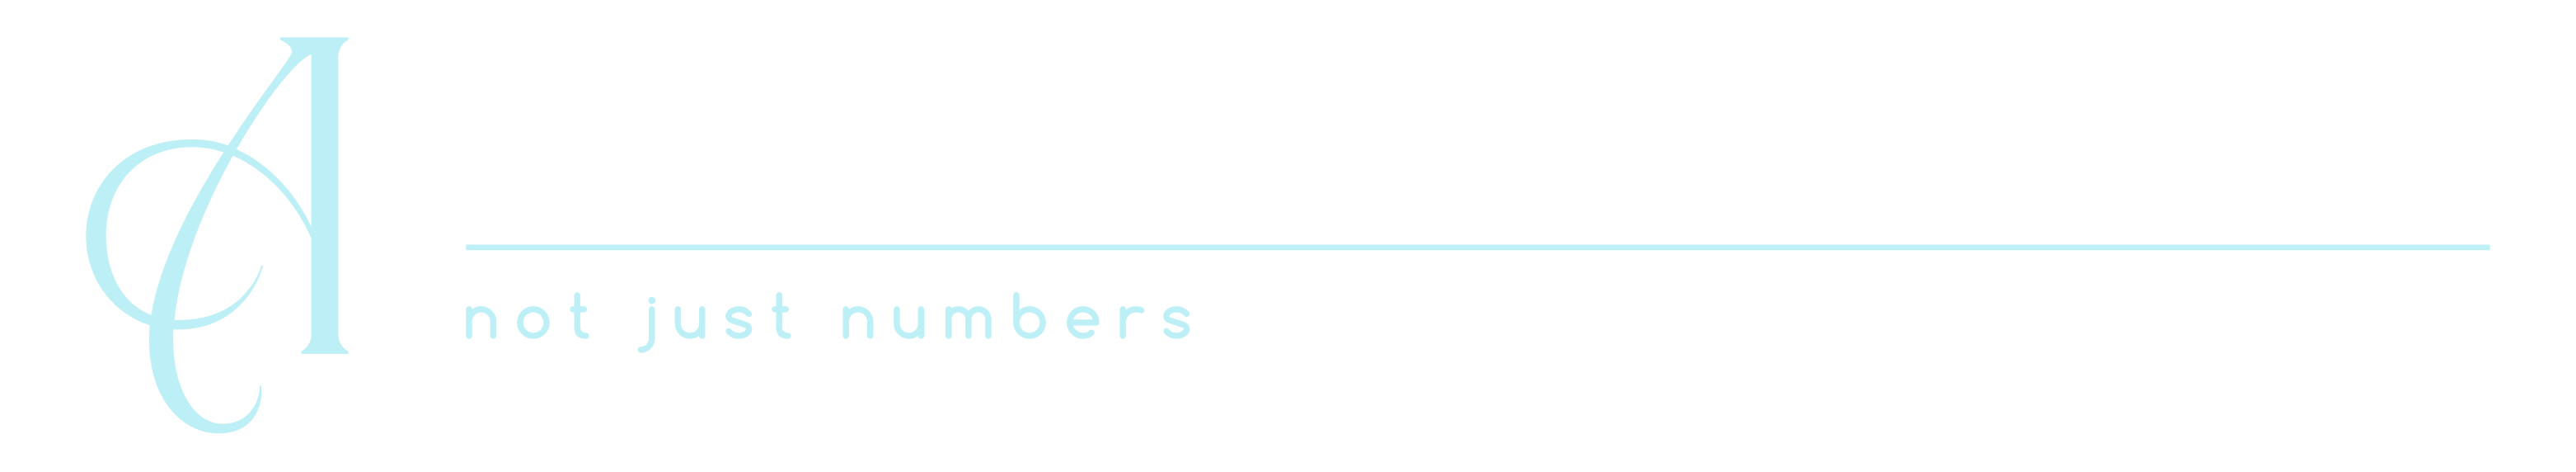 Alomes Cooper Financial